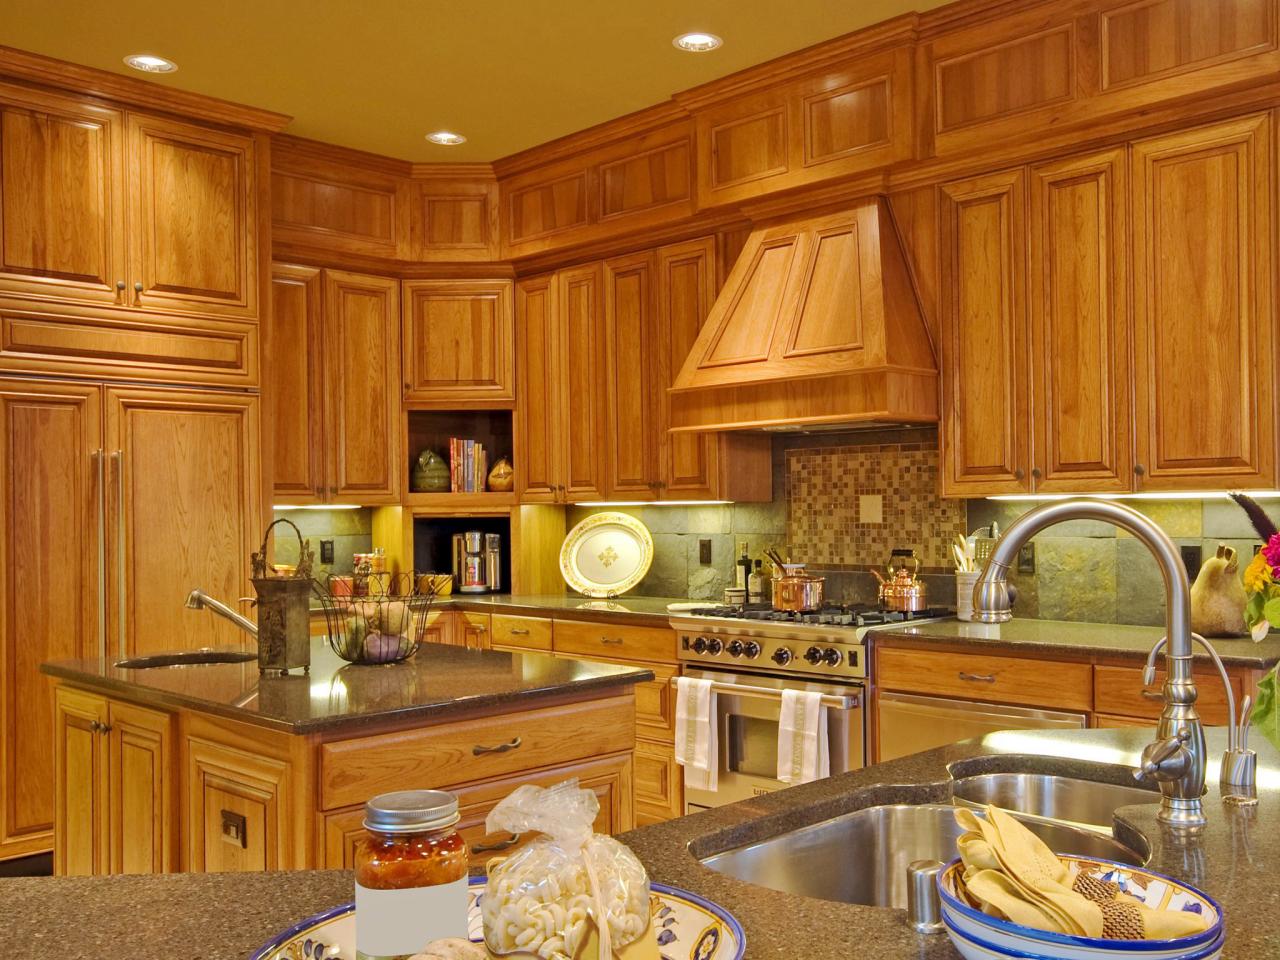 Mission Style Kitchen Cabinets, Mission Shaker Kitchen Cabinets